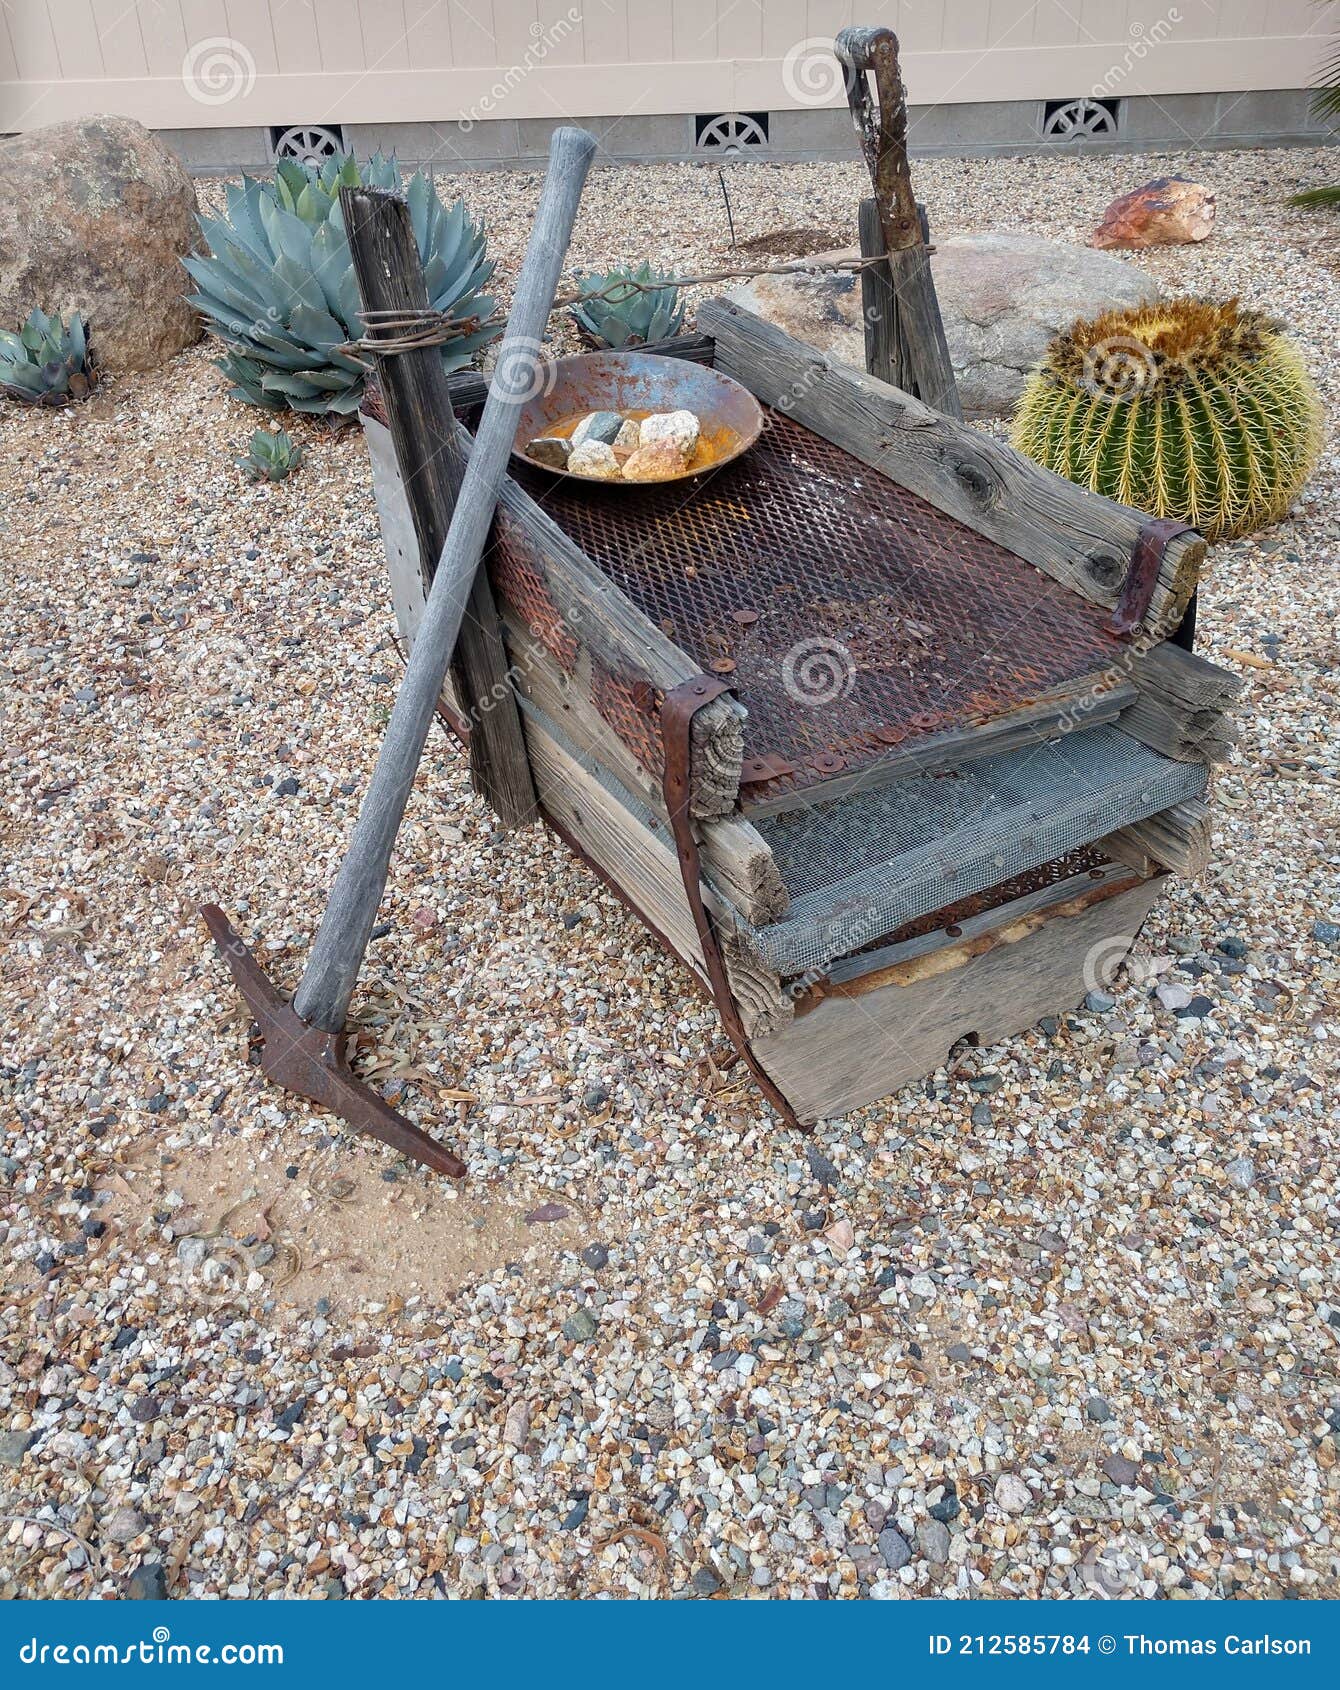 vintage gold prospecting rocker box with gold pan.